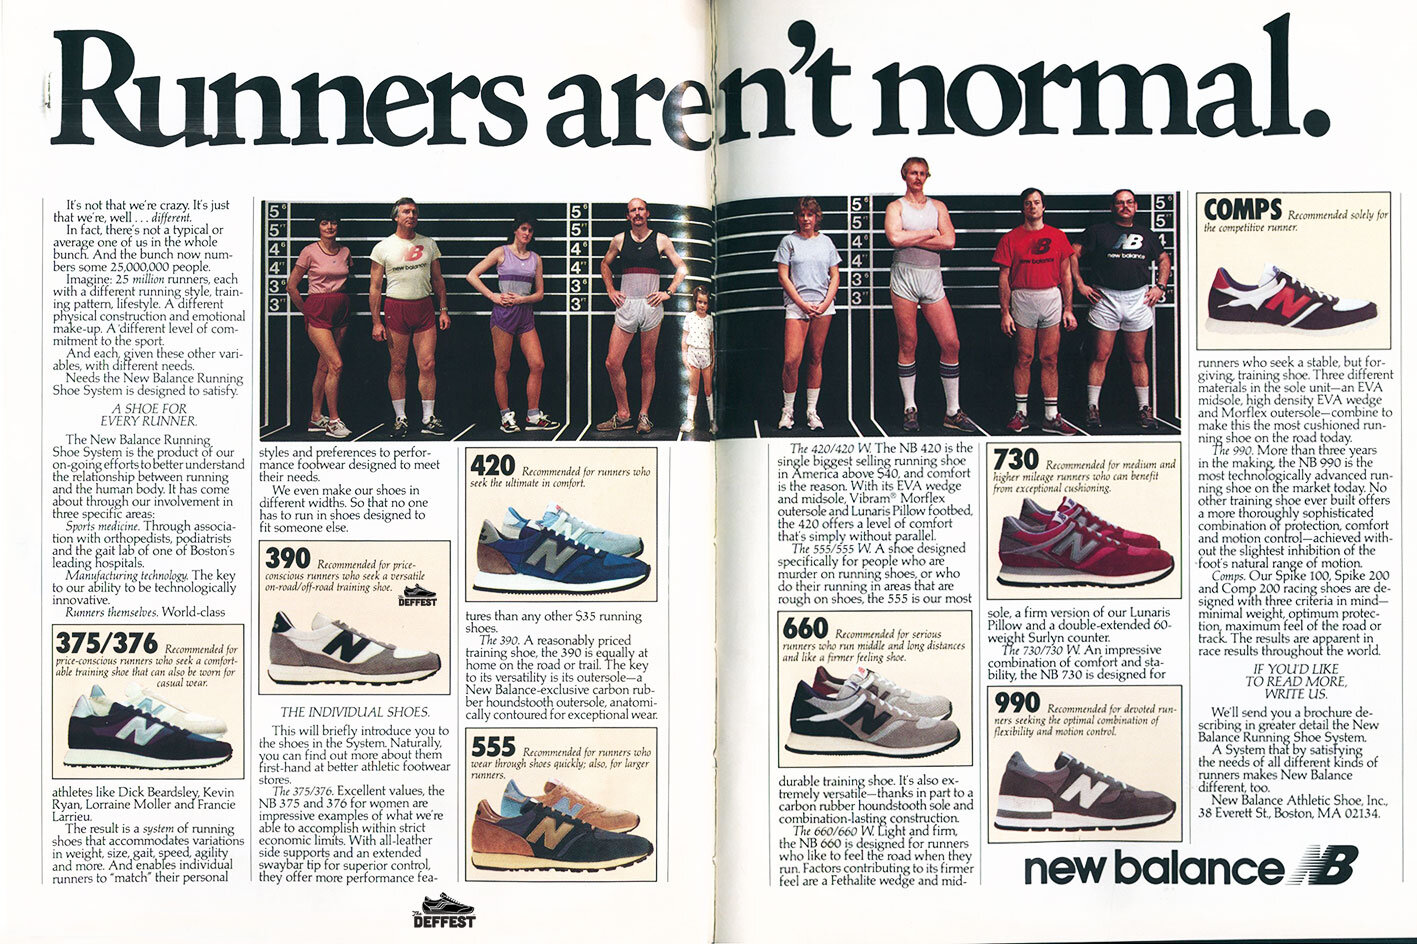 New Balance 1982 vintage sneaker ad @ The Deffest